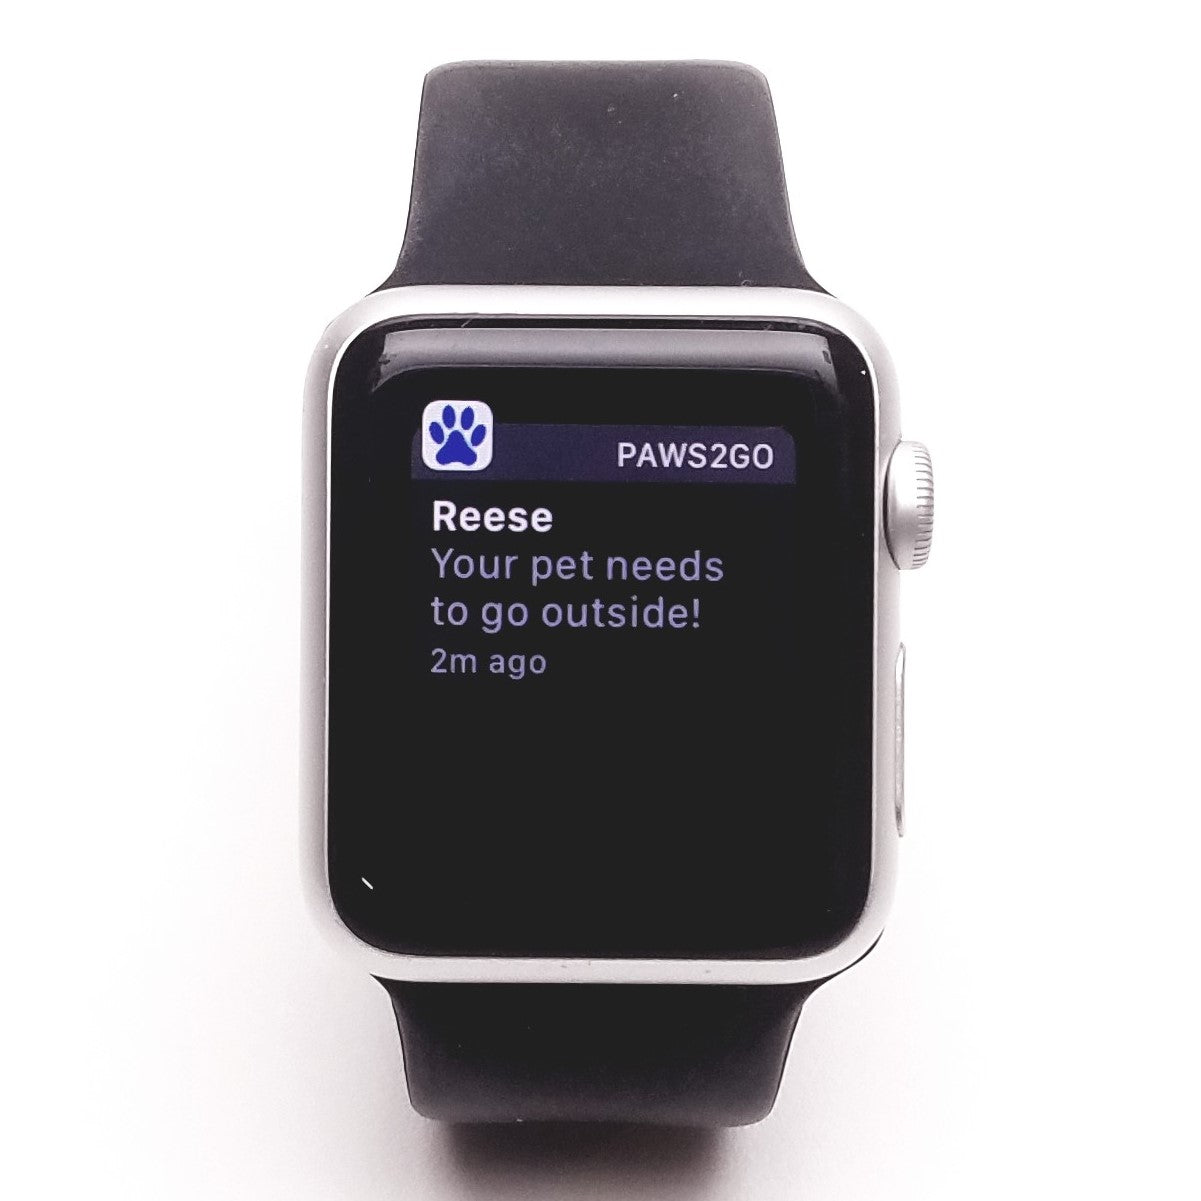 Picture of an Apple watch showing a notification after their dog touched the Paws2Go